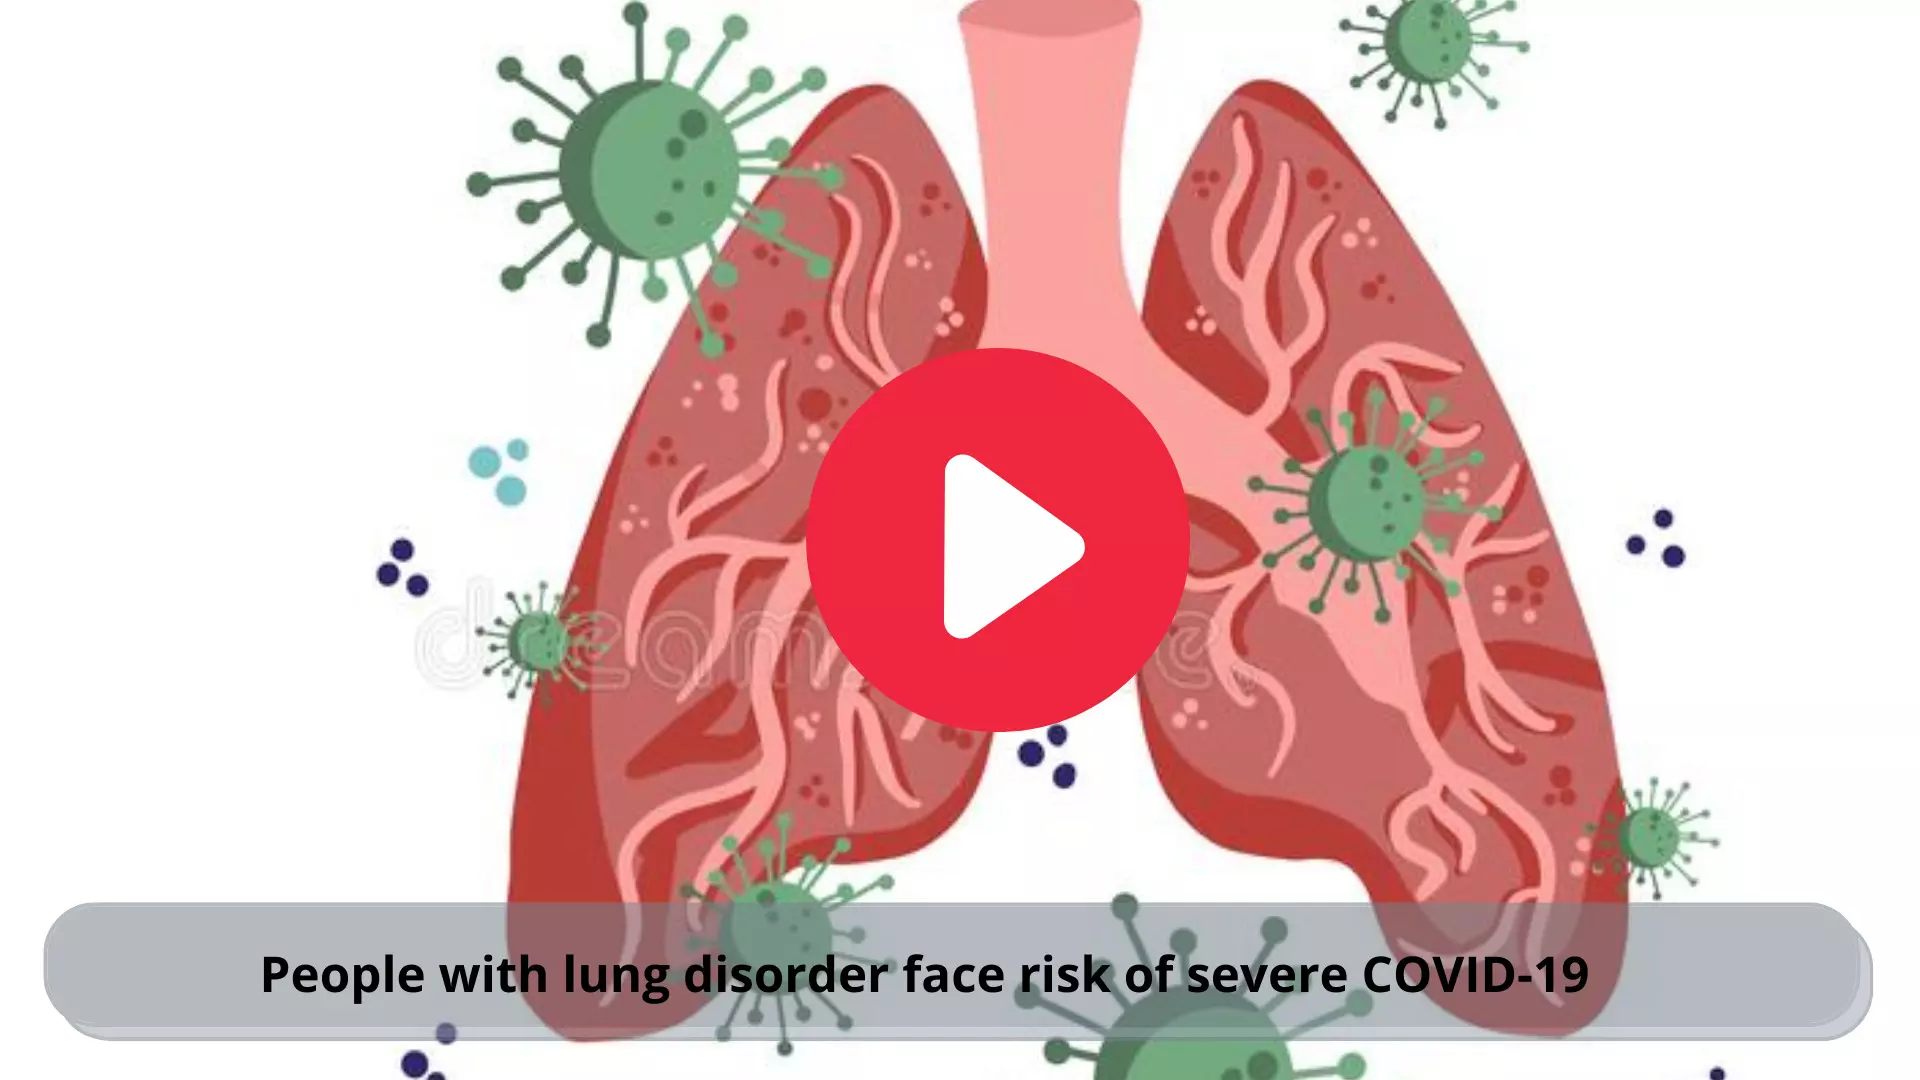 People with lung disorder face risk of severe COVID-19